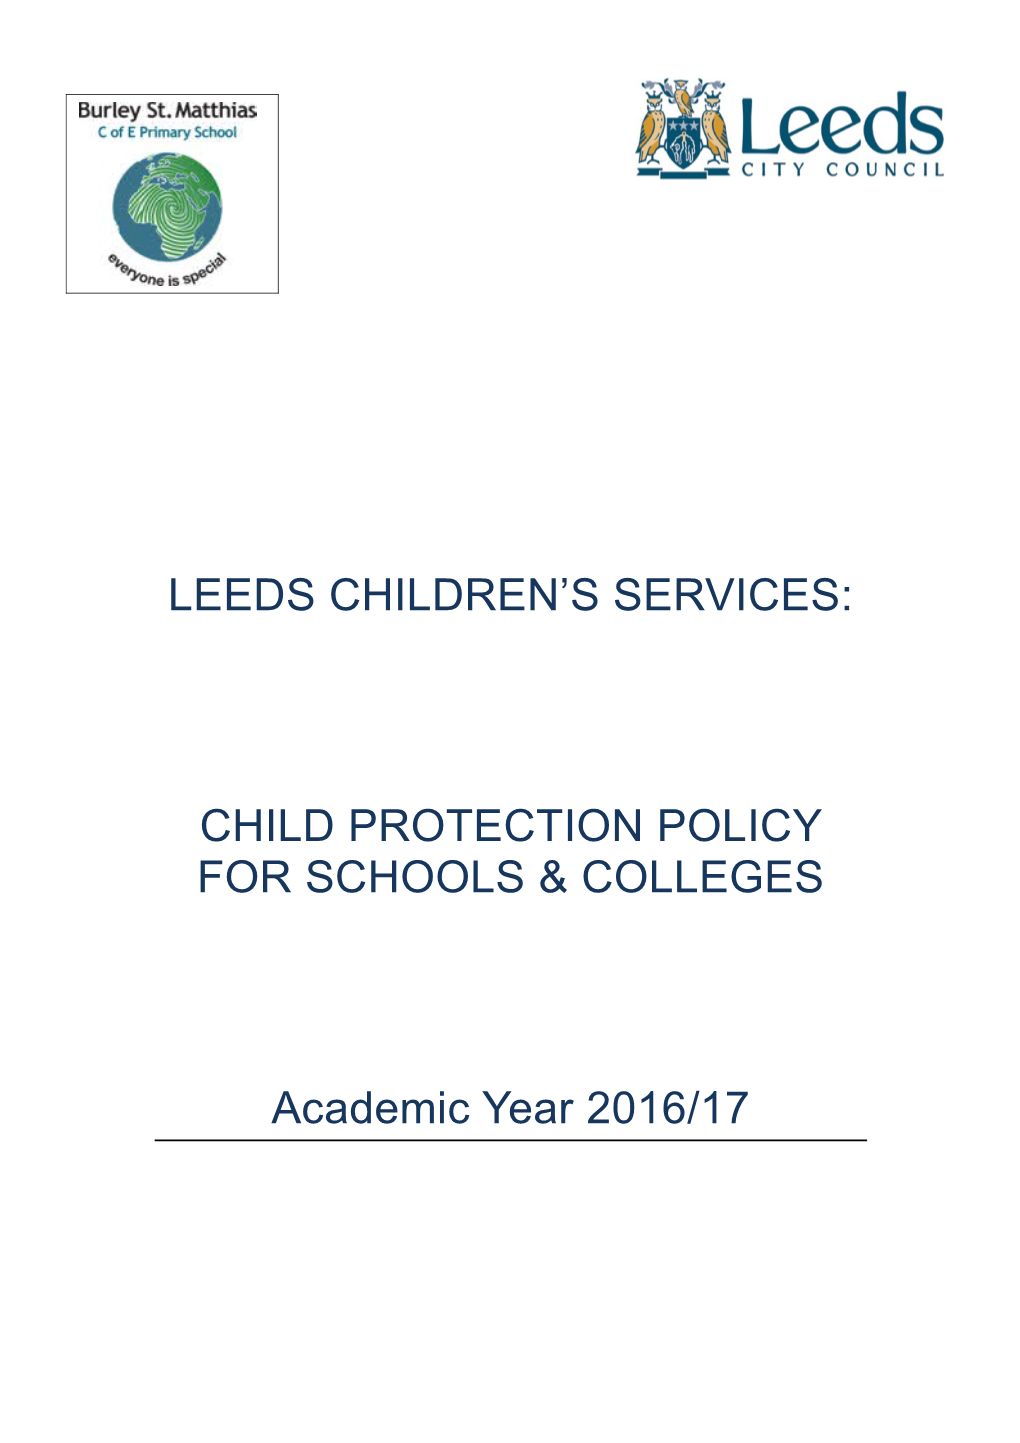 Child Protection Policy for Schools & Colleges